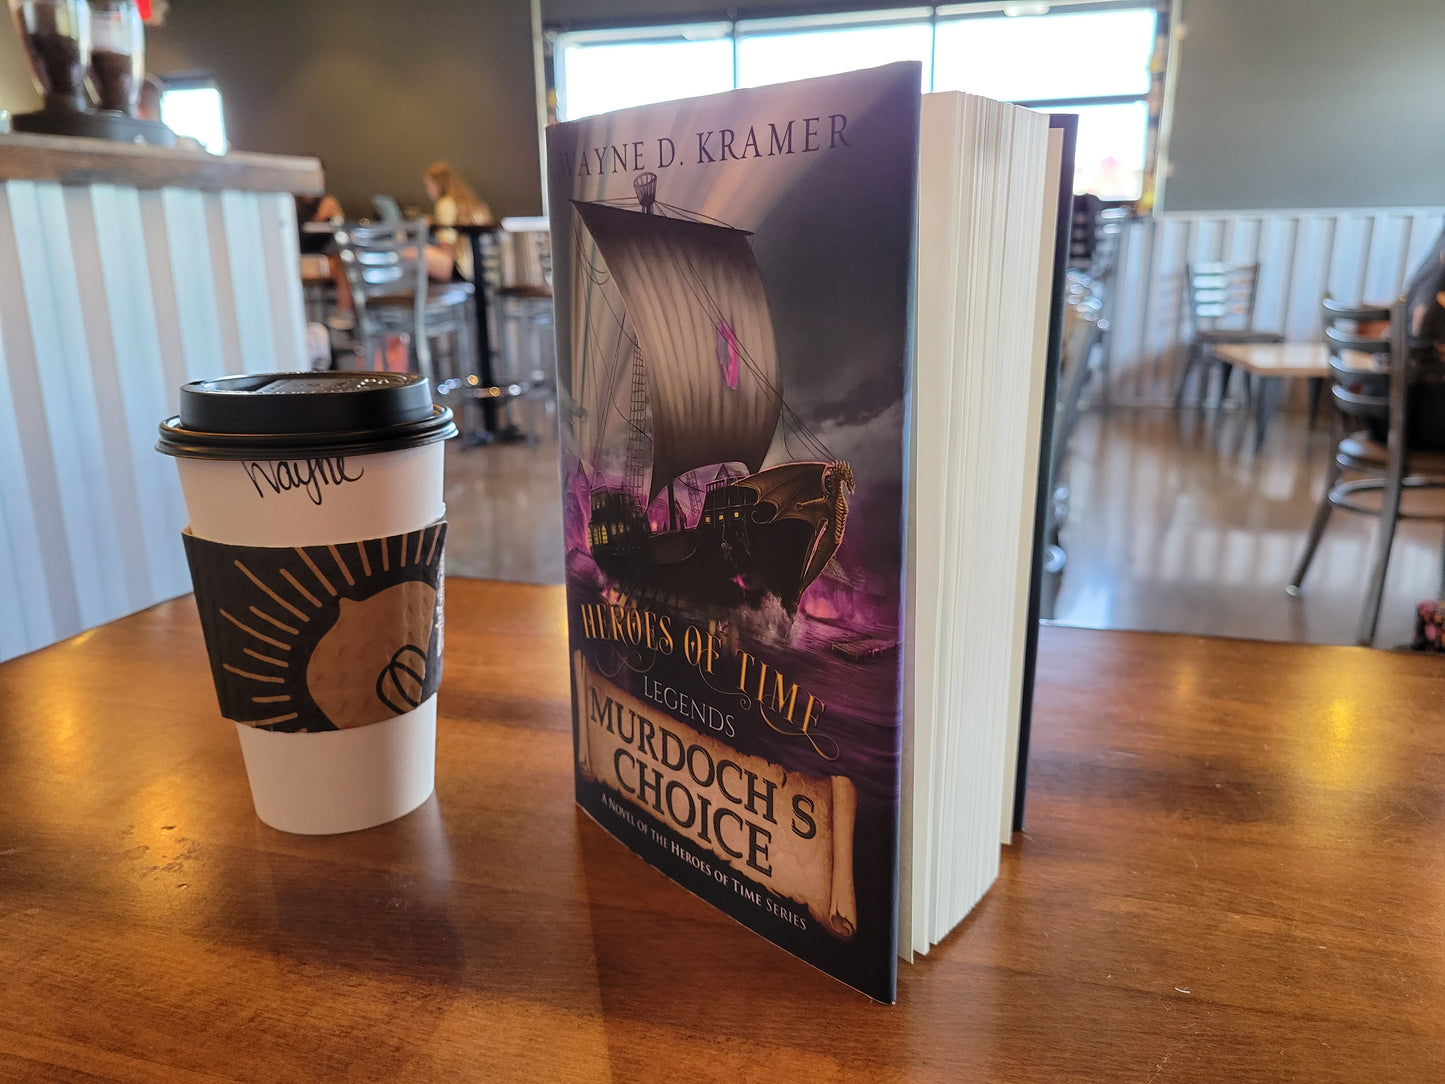 Murdoch's Choice hardcover on display at coffee shop